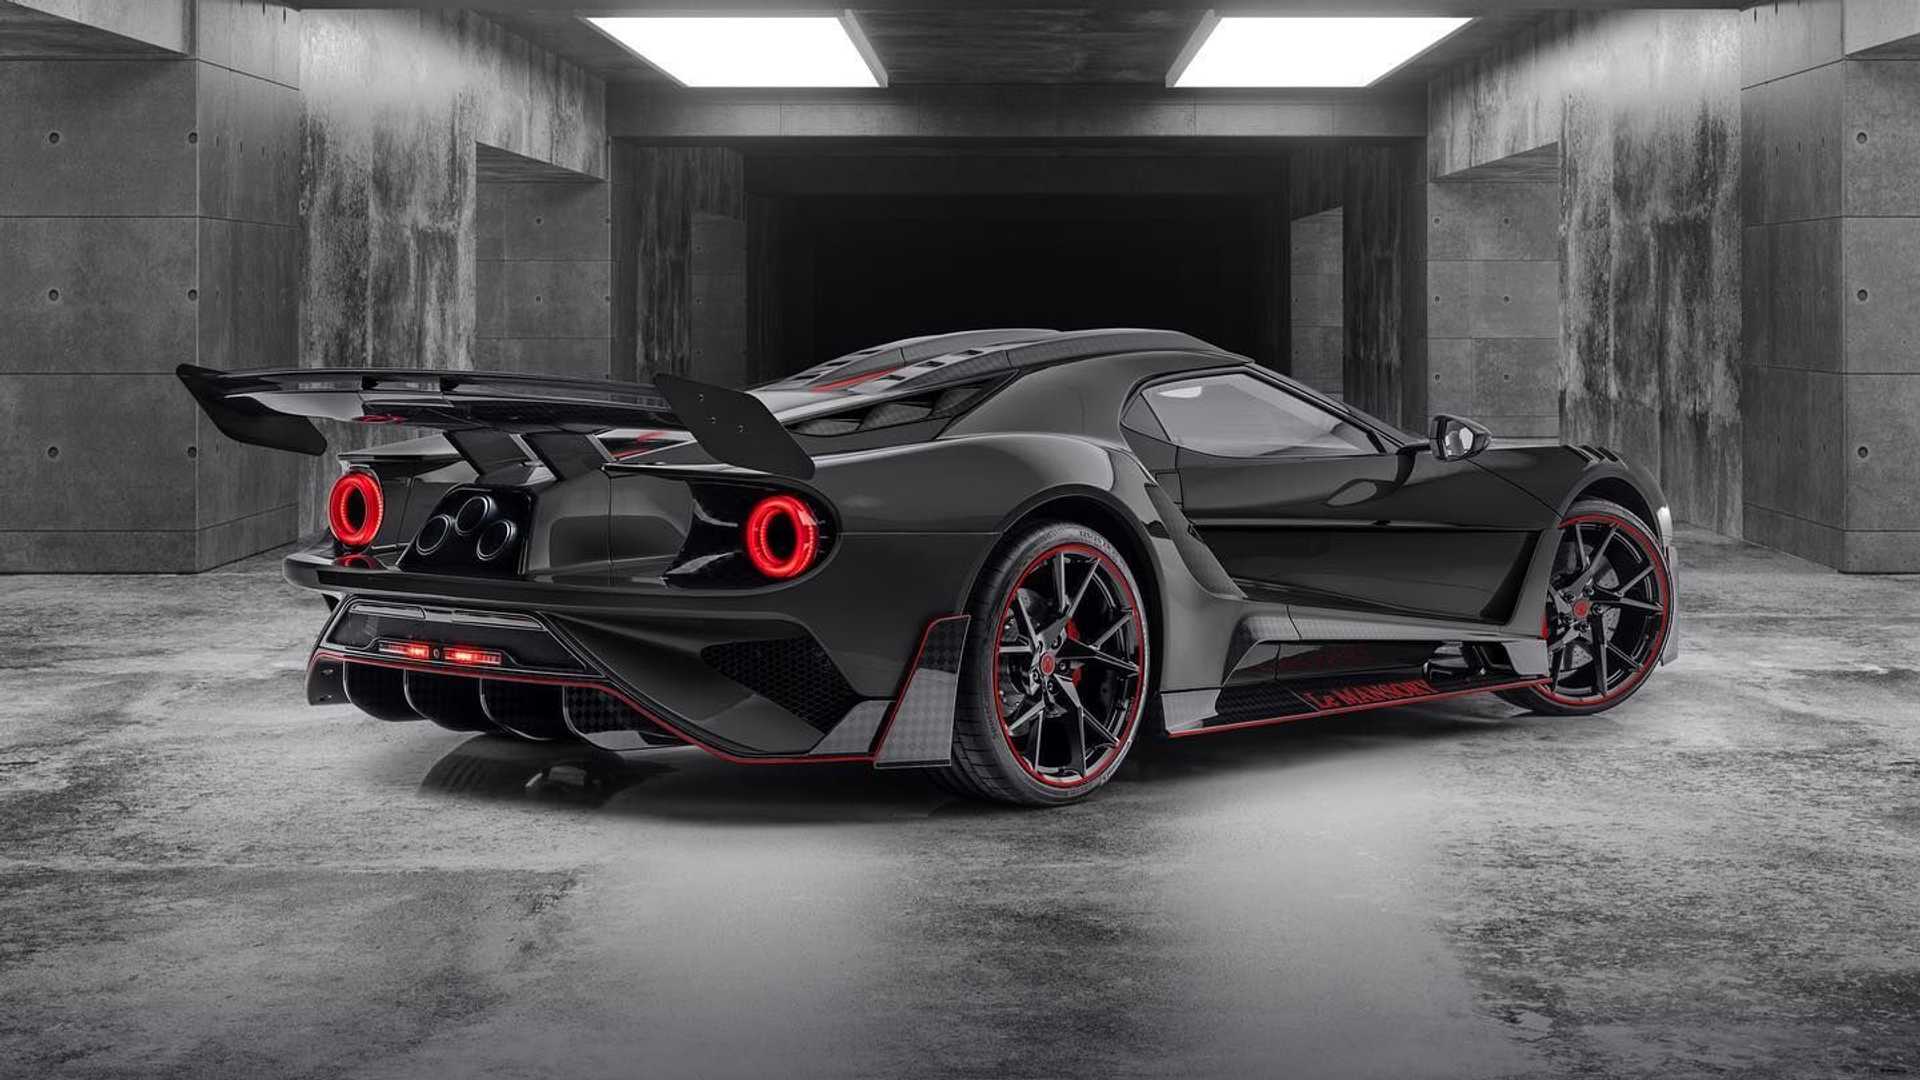 The second installment of the Ford GT 'Le MANSORY' is even more radical and sinister